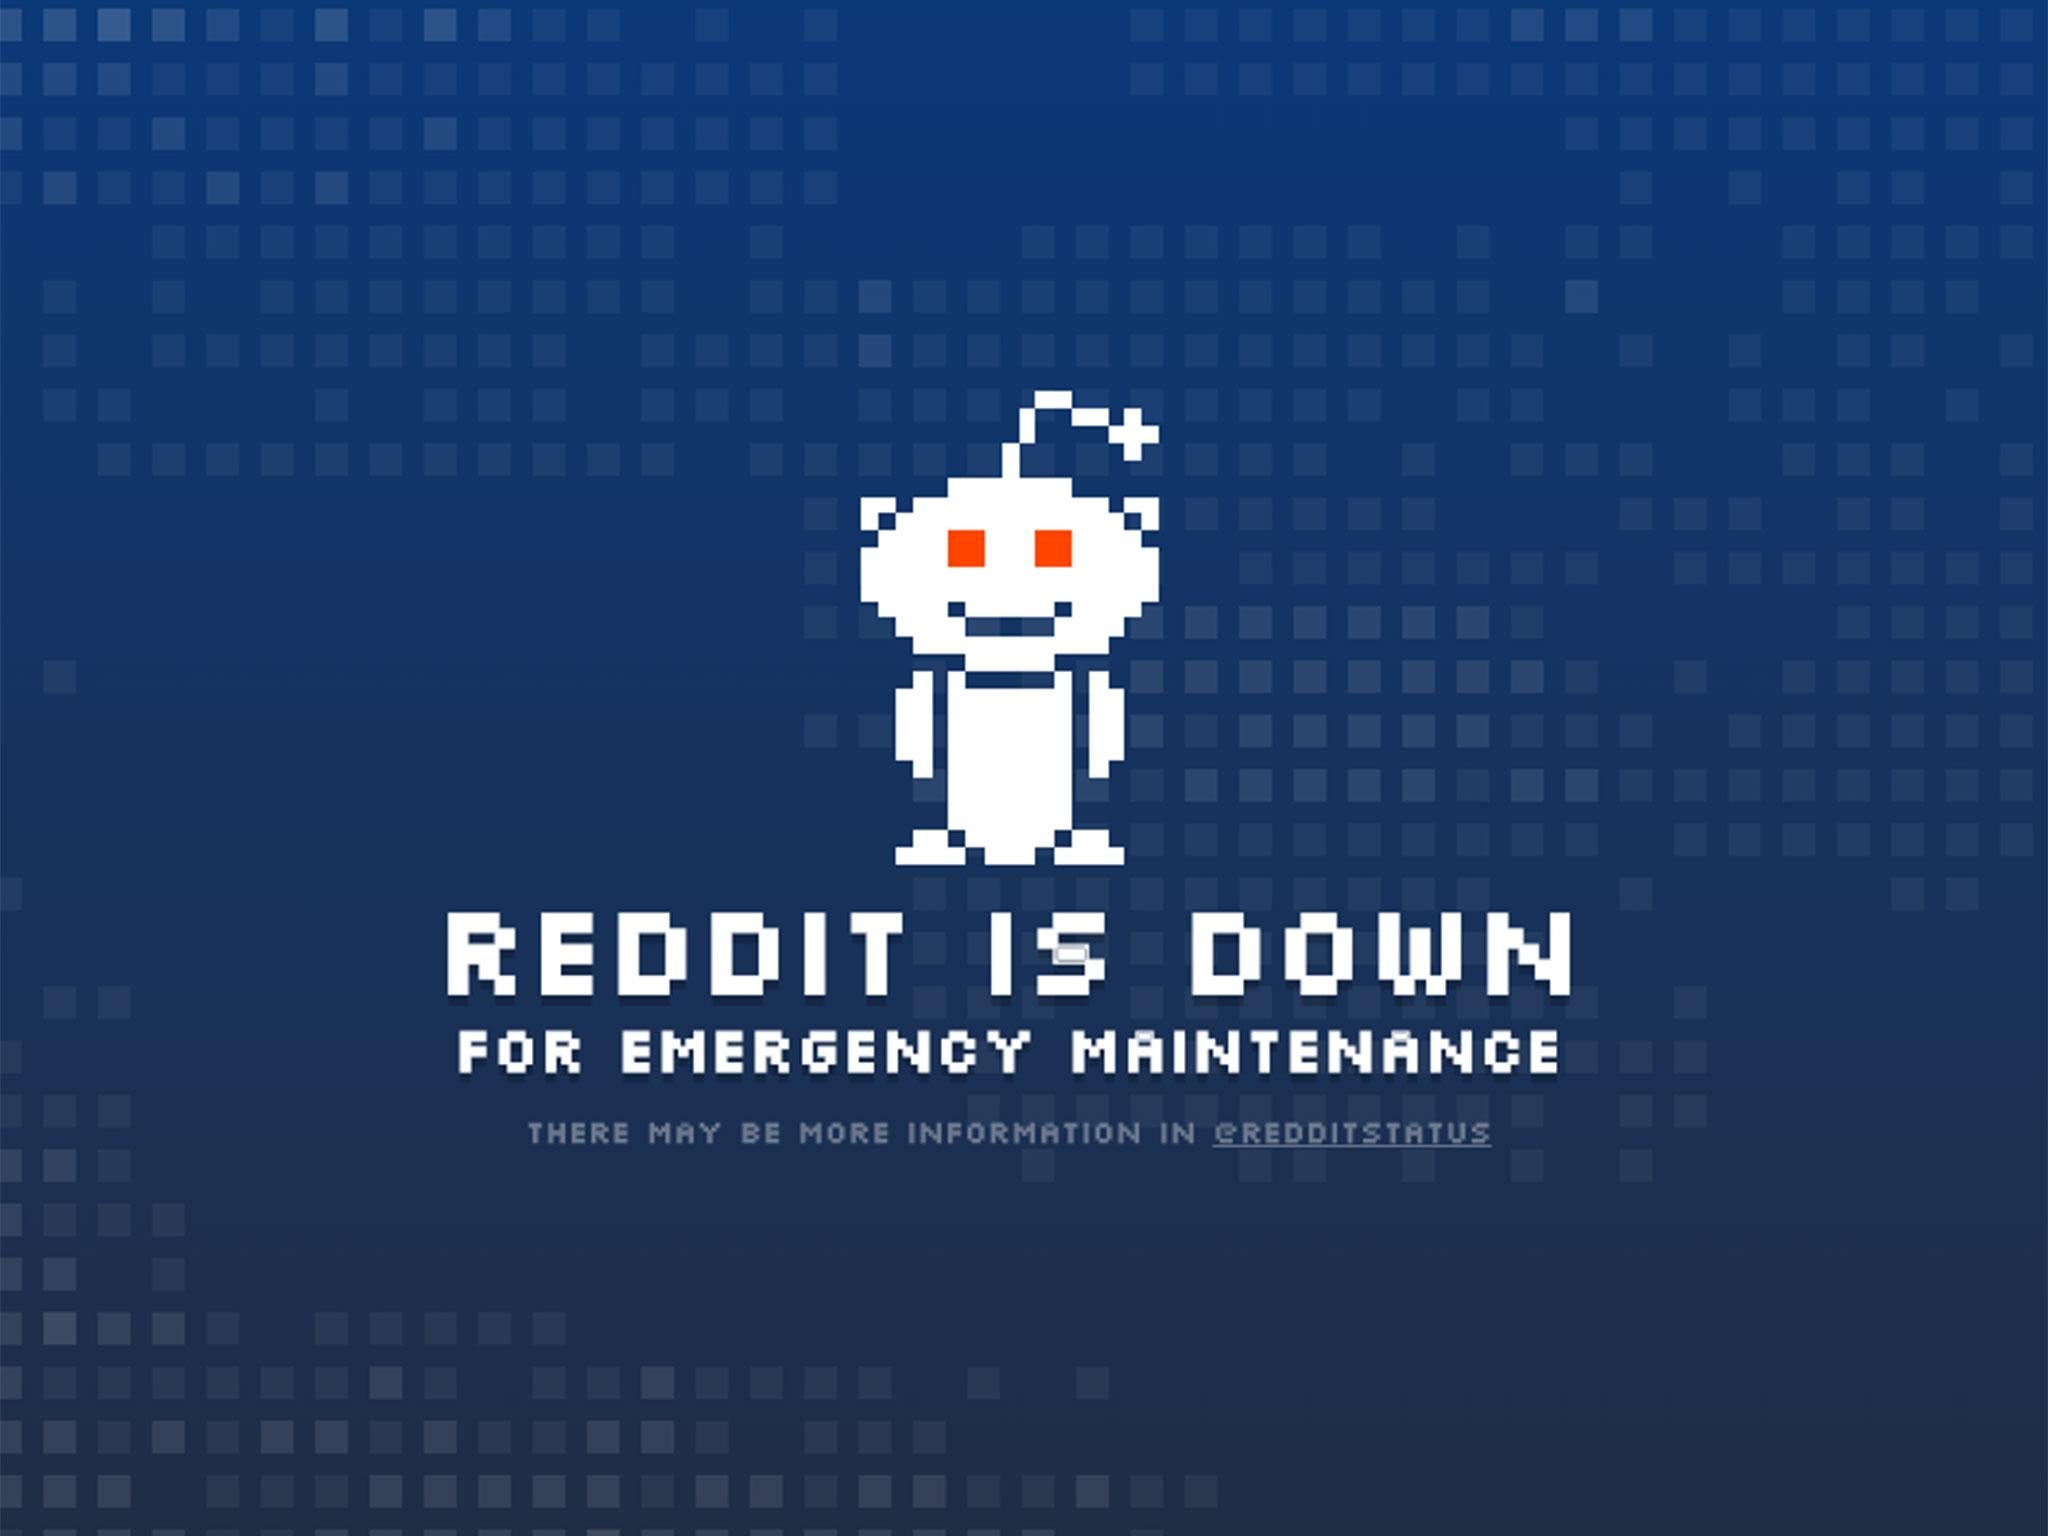 Reddit users were greeted by this message on the site's homepage